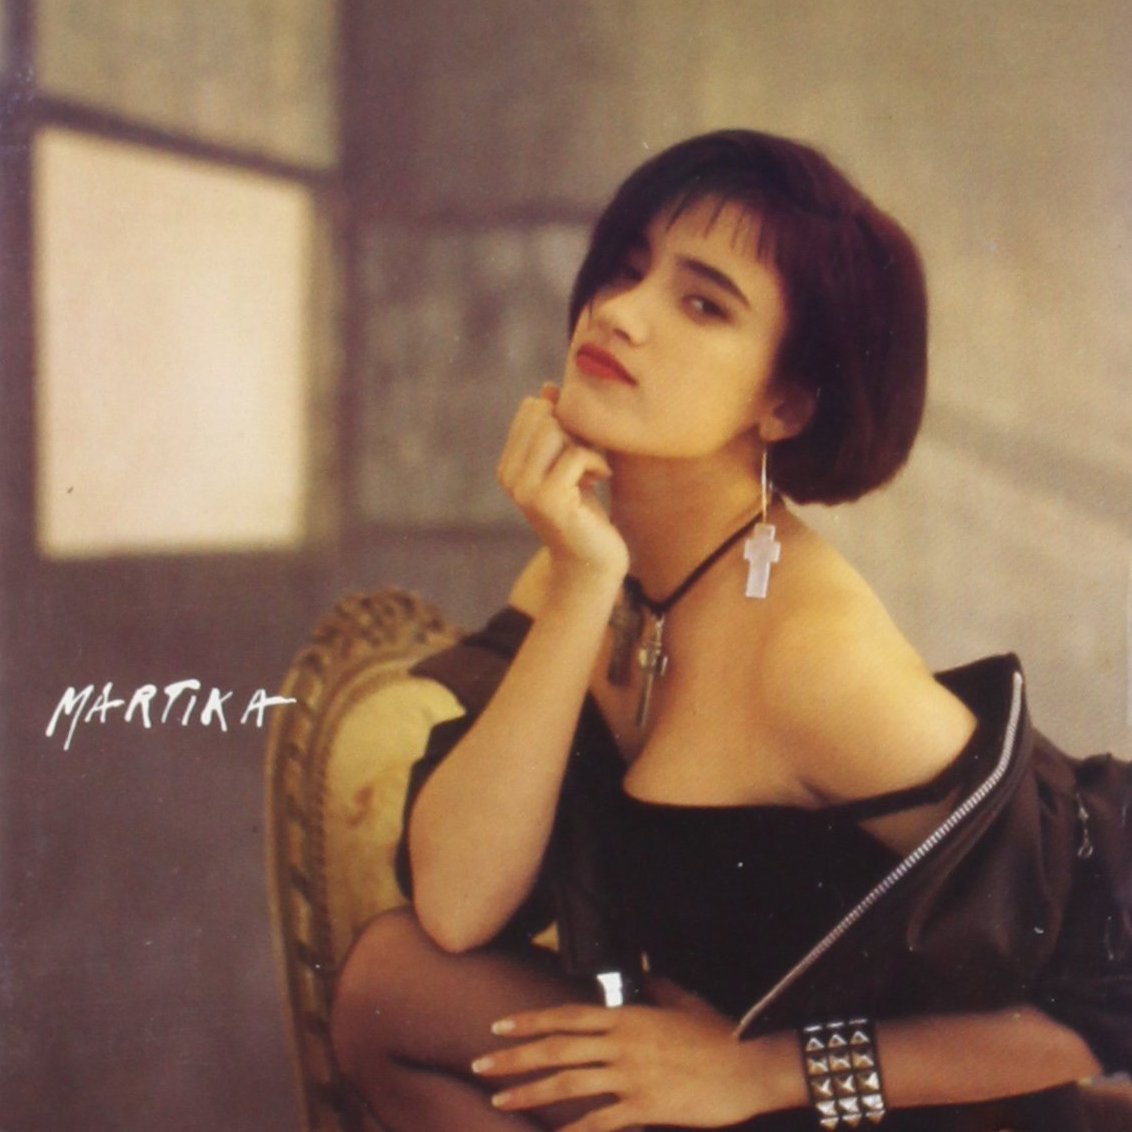 Classic Pop would like to wish Martika a very happy birthday... in this interview from our archives she reflects on the pressures of fame. classicpopmag.com/2023/03/martik…